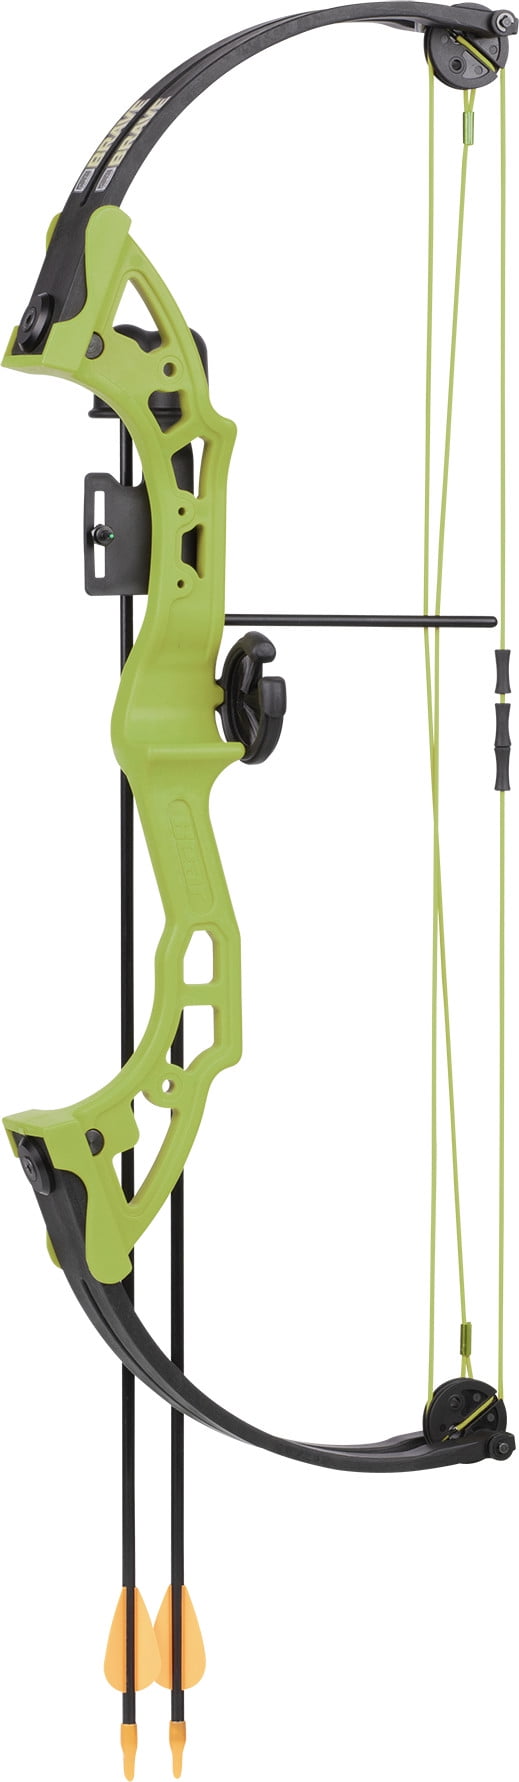 Details about   Smartphone Camera Bow Mount Phone Holder on Recurve Compound Bow 